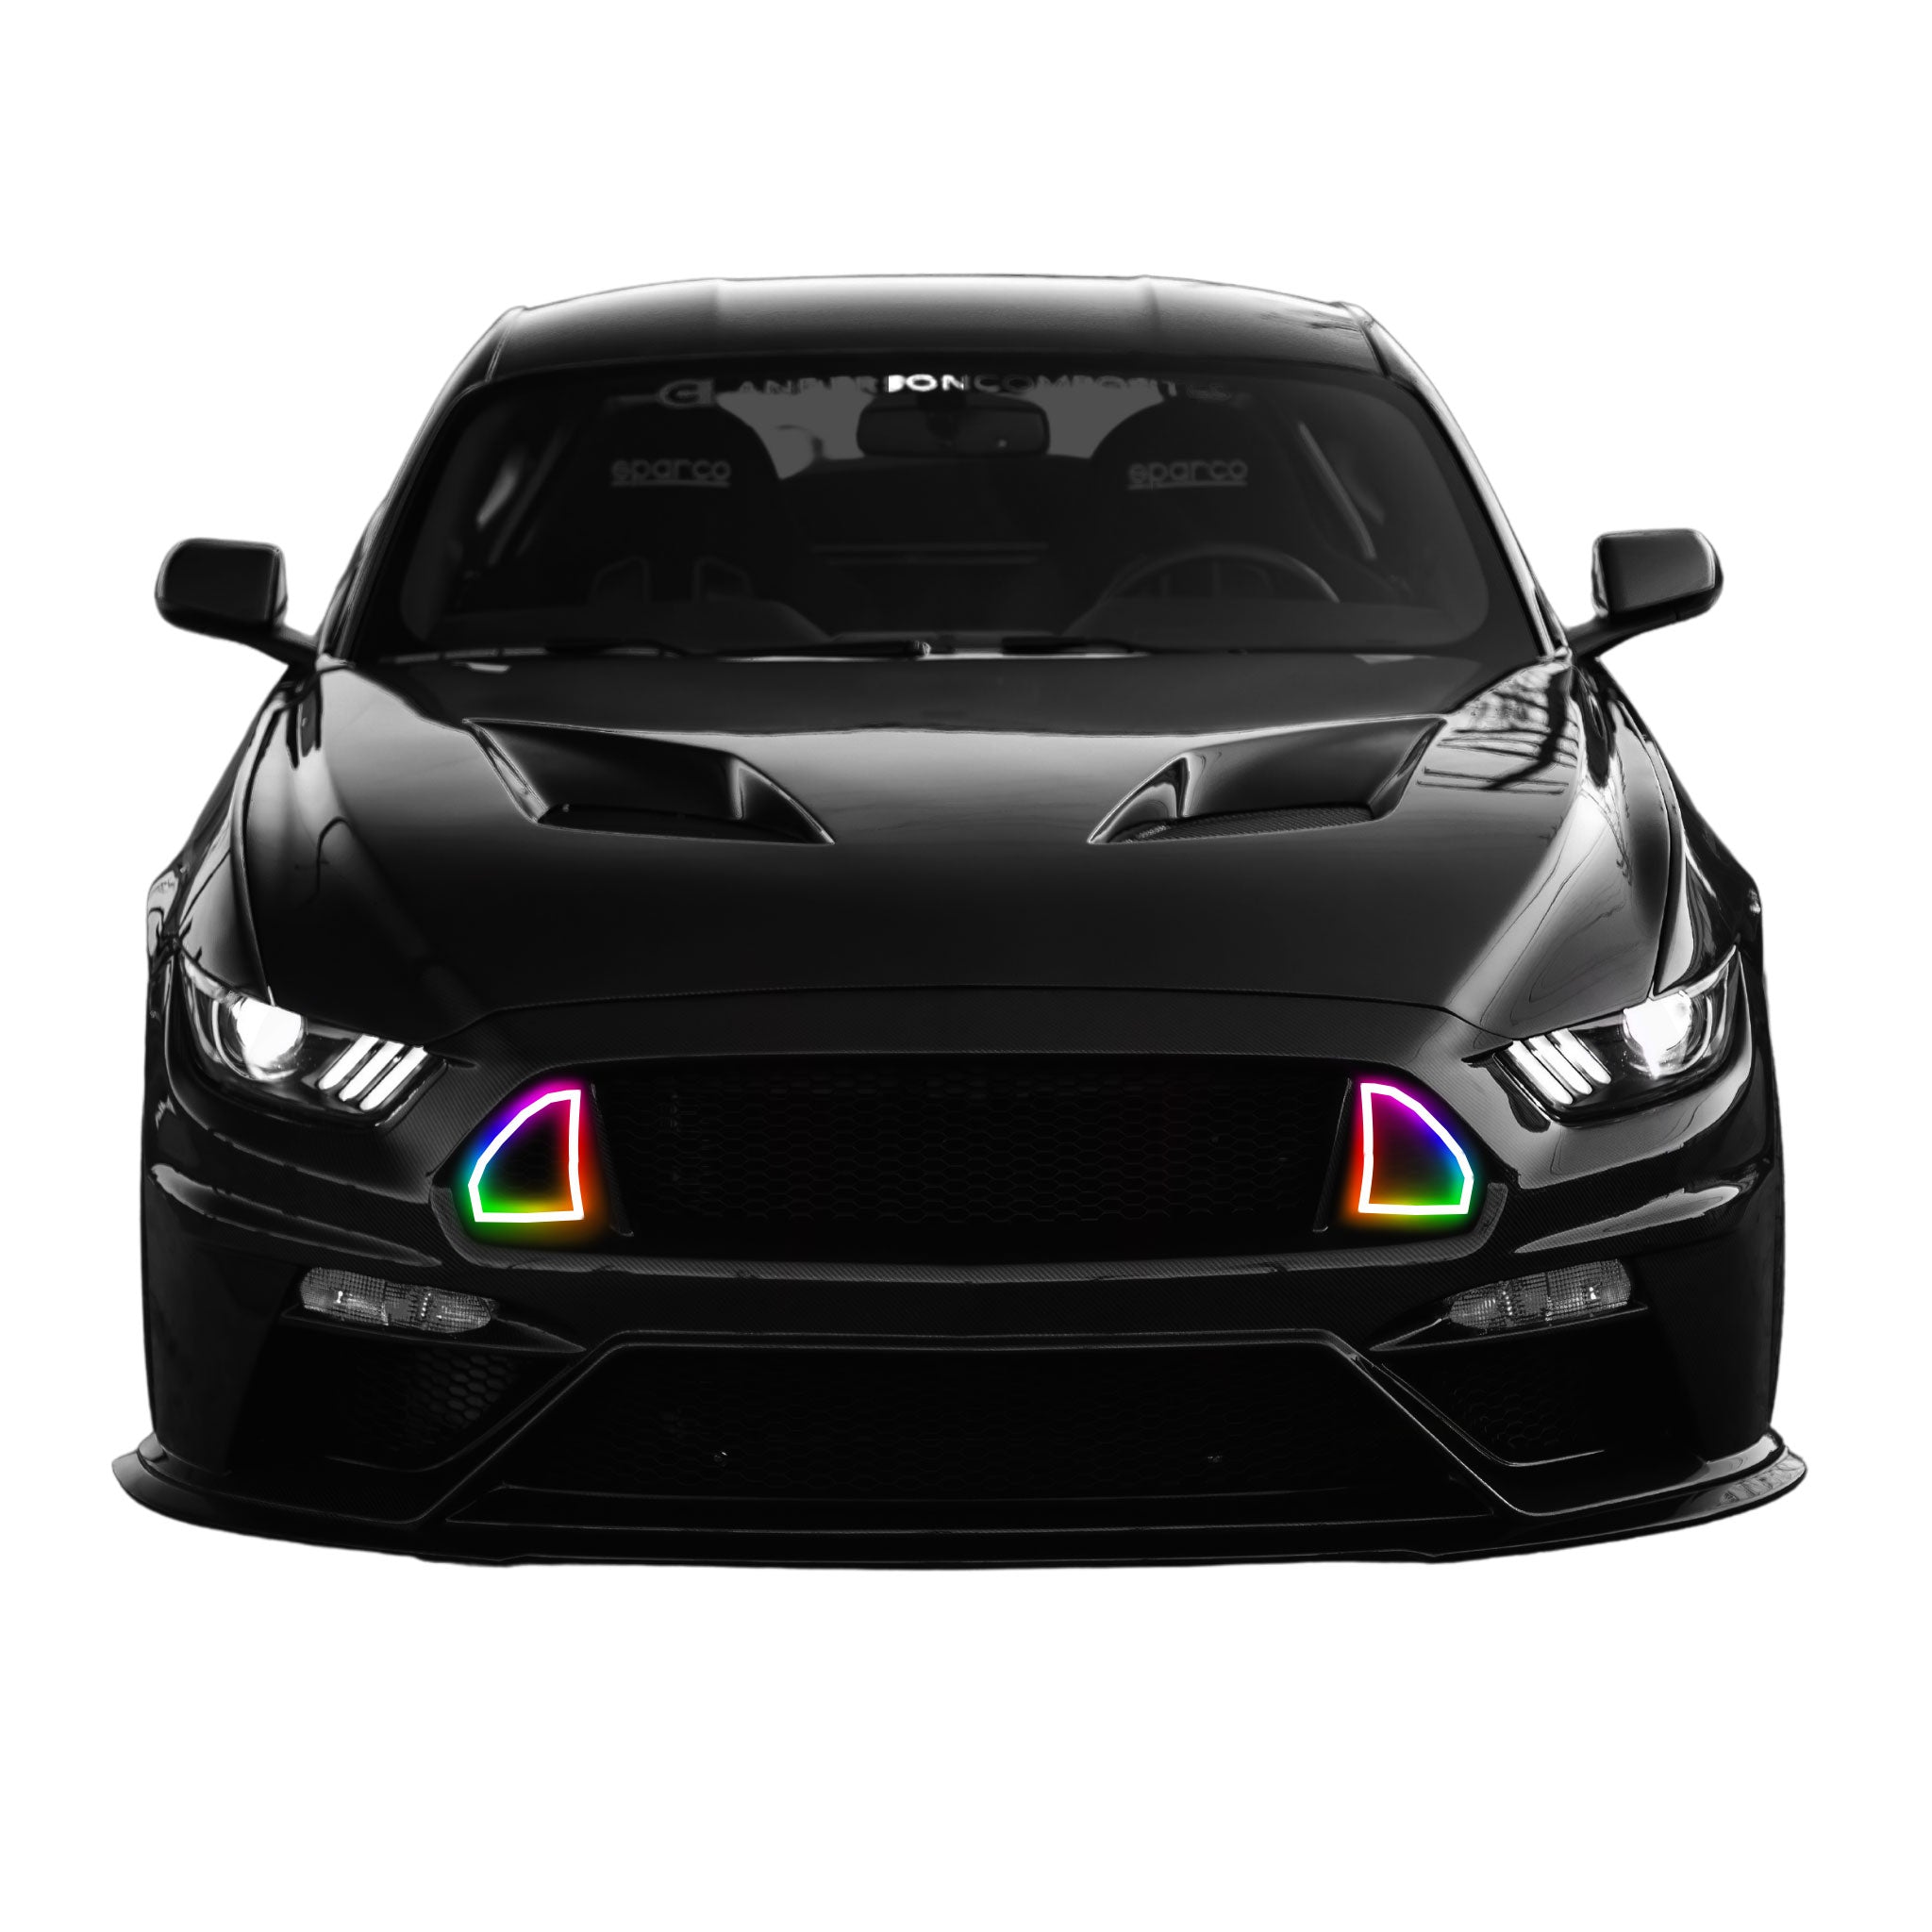 2015-2017 Ford Mustang GT Grill Multicolor Halo Kit (Waterproof) - RGB Halo Kits Multicolor Flow Series Color Chasing RGBWA LED headlight kit Oracle Lighting Trendz OneUpLighting Morimoto theretrofitsource AutoLEDTech Diode Dynamics